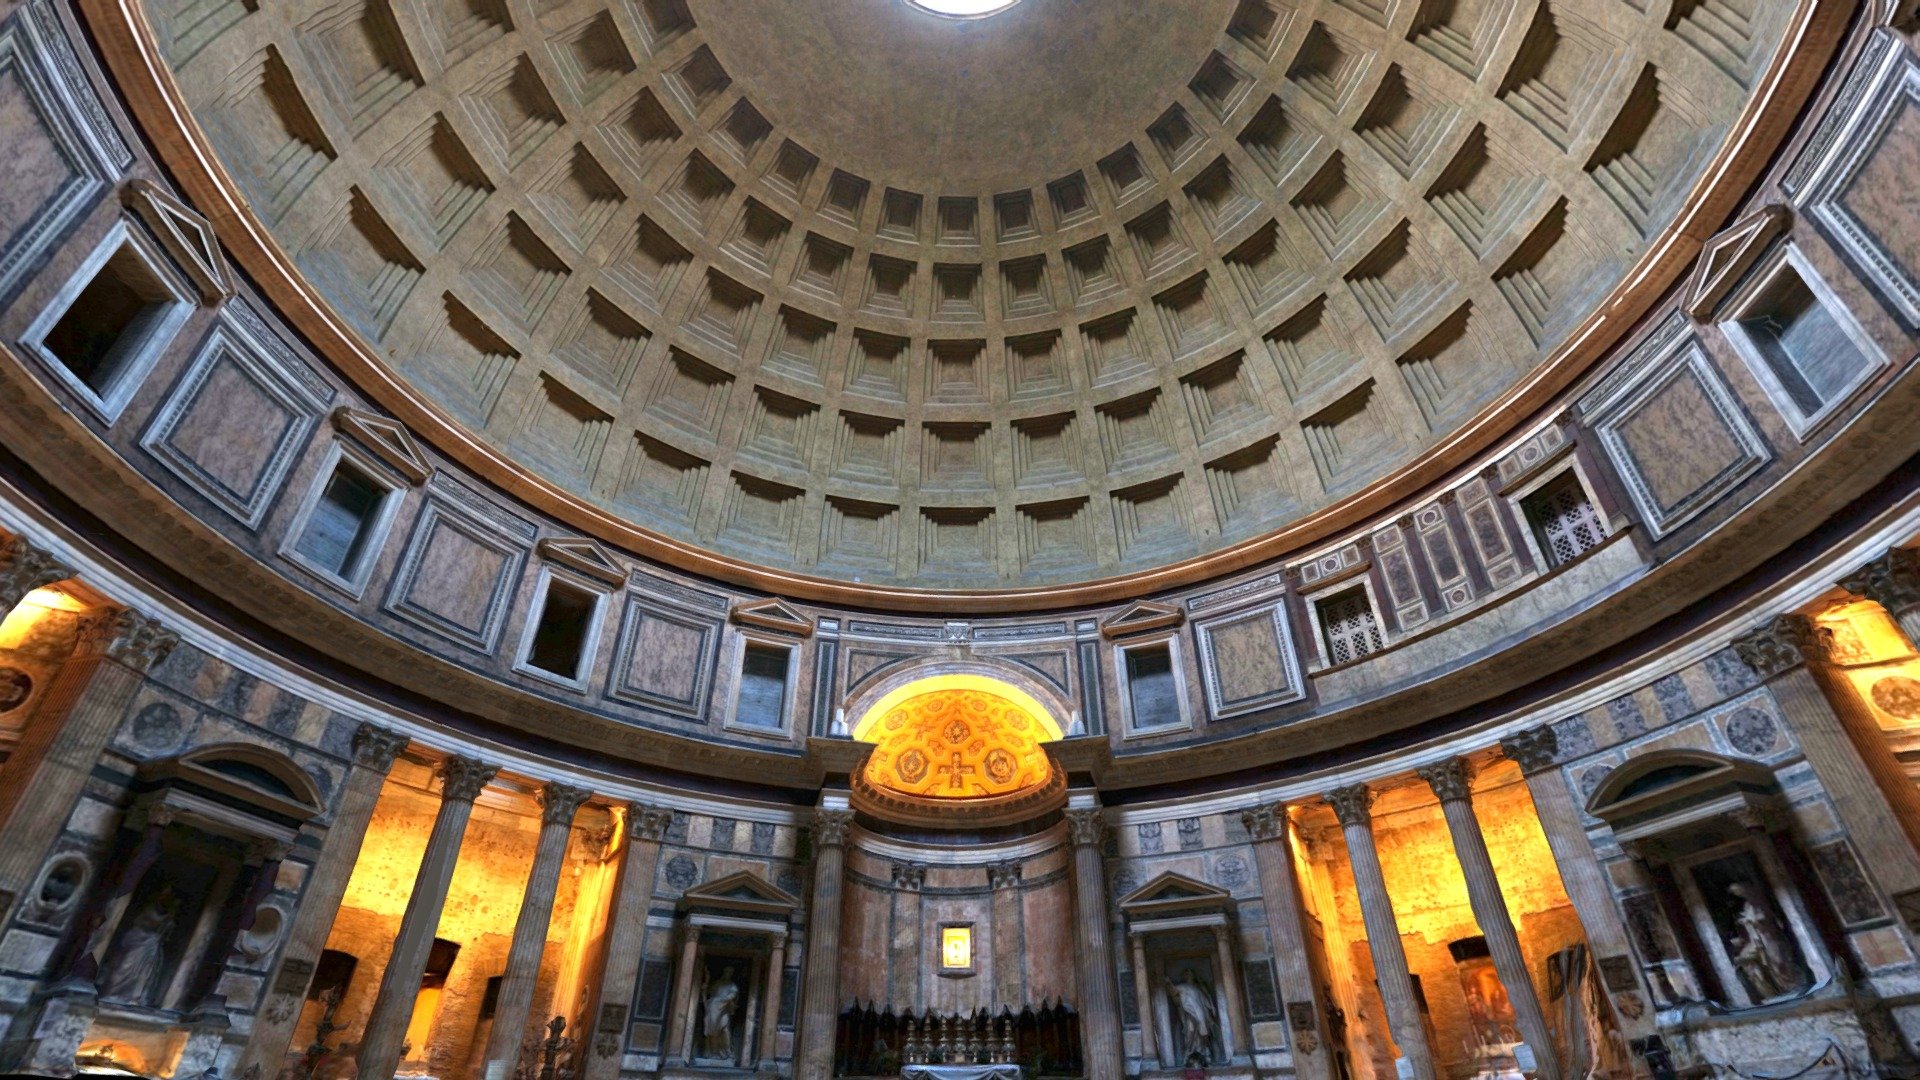 The interior dome and walls of the Pantheon, in Rome, Italy.

The structure known today as the Pantheon was originally constructed by Marcus Agrippa during the reign of Augustus. The present building was restored or completed by the emperor Hadrian.  

Remarkably, the Pantheon has been in continuous use since the 100's CE, when it was likely dedicated by Hadrian in 126. Since the 7th century, it has been used as a Catholic church.

The dome of the Pantheon is still the largest un-reinforced concrete dome in the world, and forms a perfect half-sphere 3d model